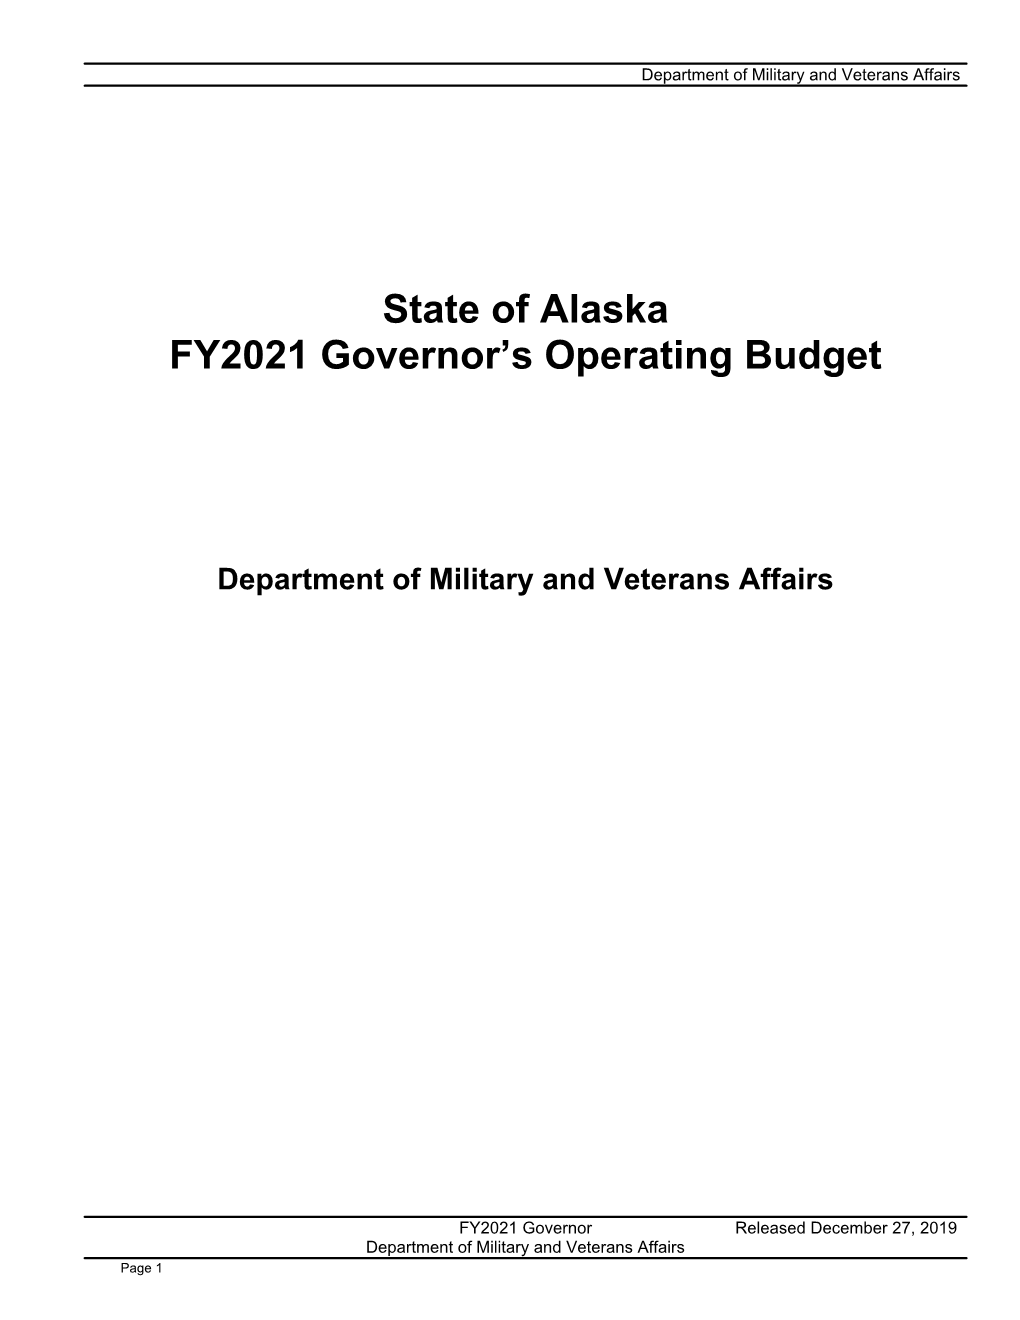 State of Alaska FY2021 Governor's Operating Budget Department of Military and Veterans Affairs